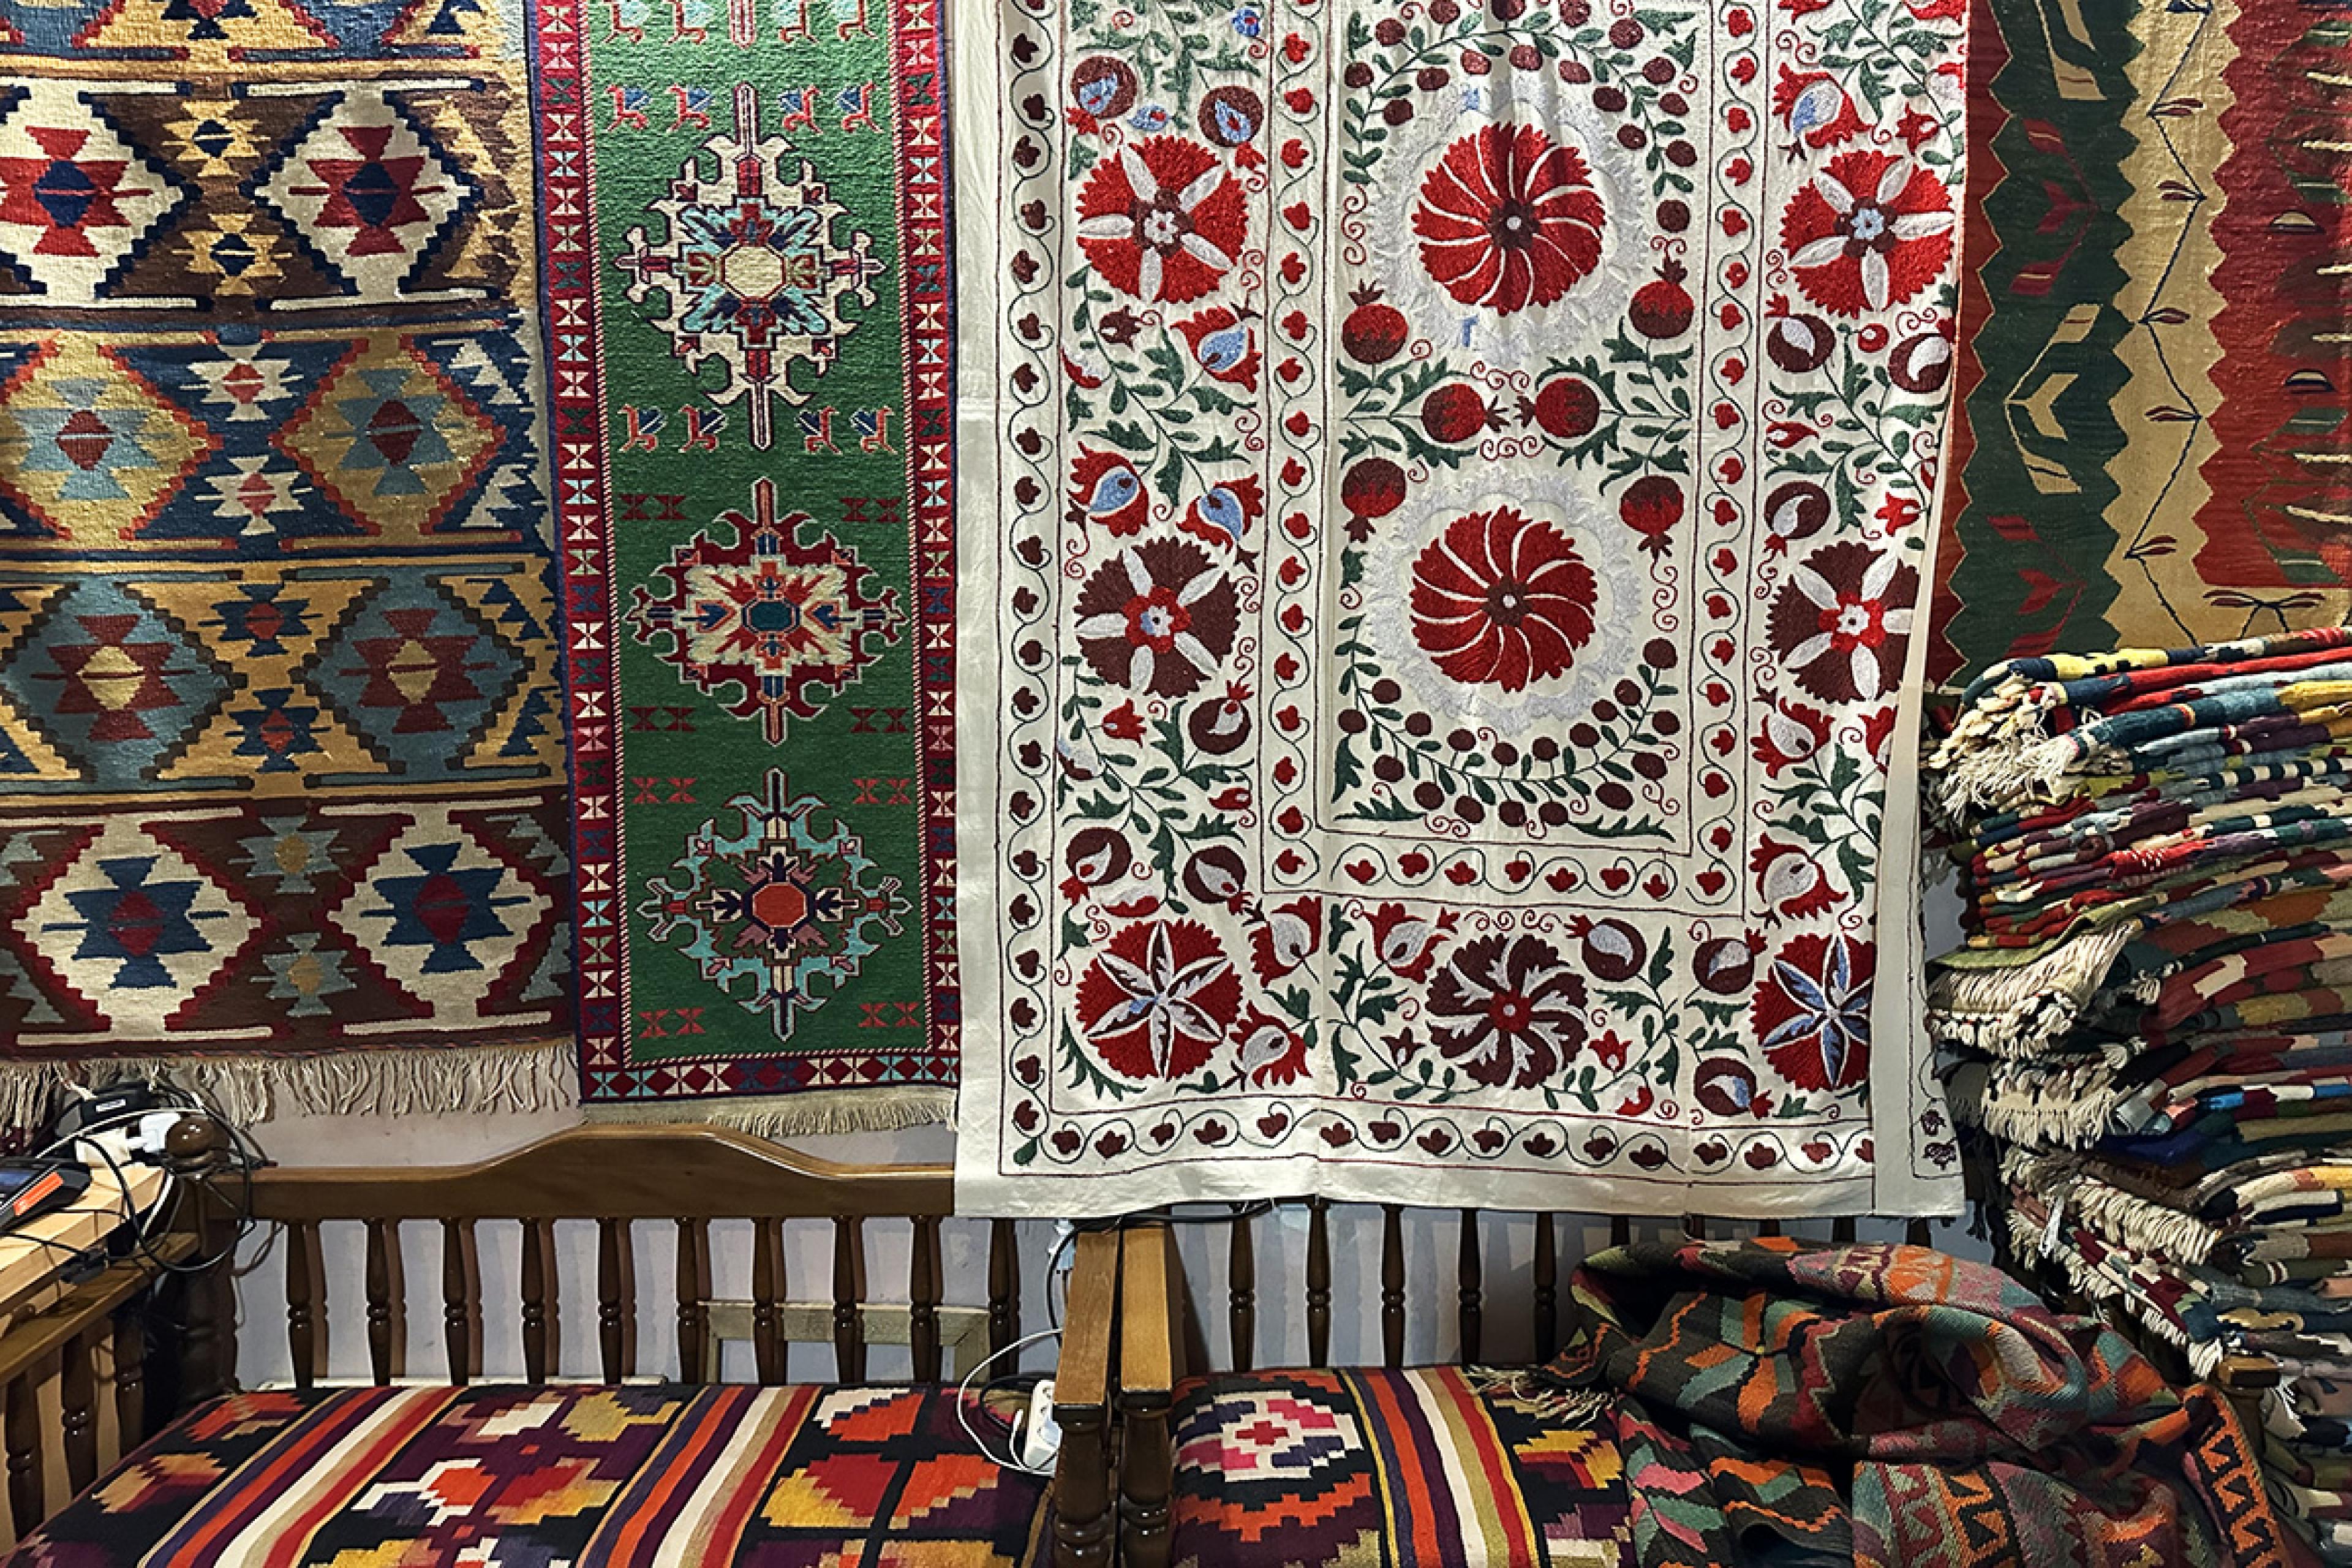 ornate carpets hanging on the wall